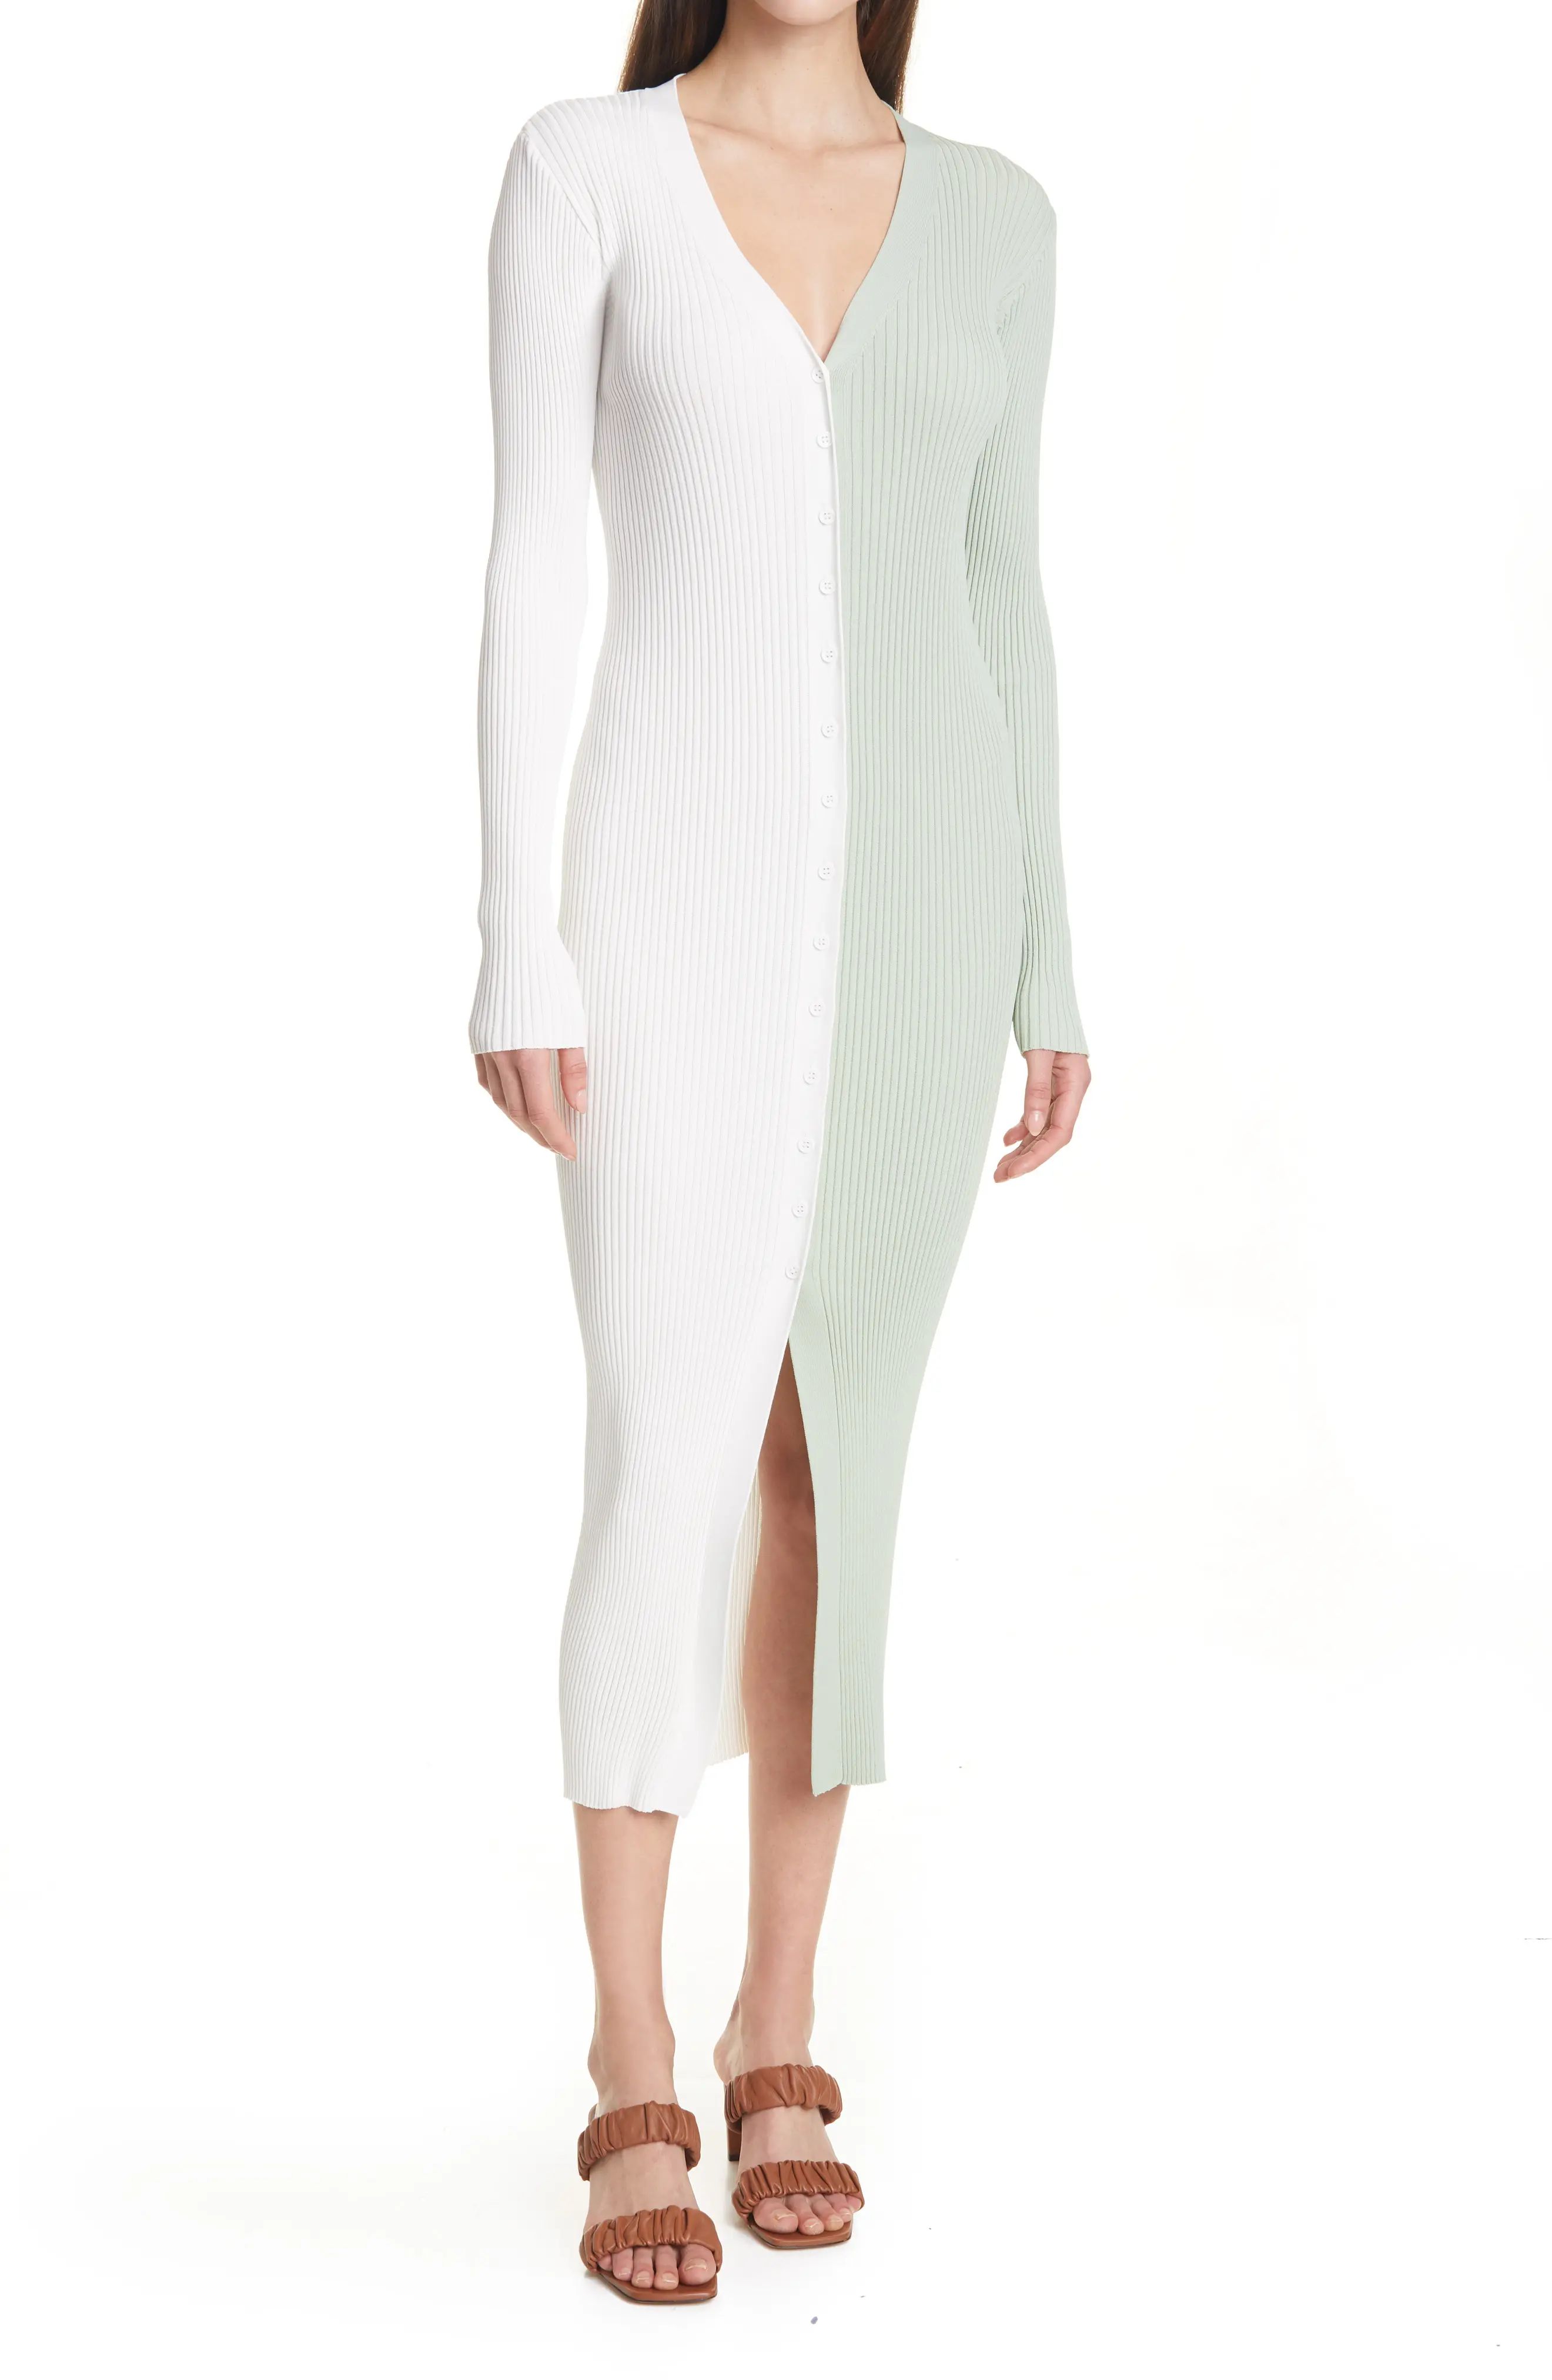 STAUD Shoko Colorblock Sweater in Ivory/Sage at Nordstrom, Size X-Small | Nordstrom